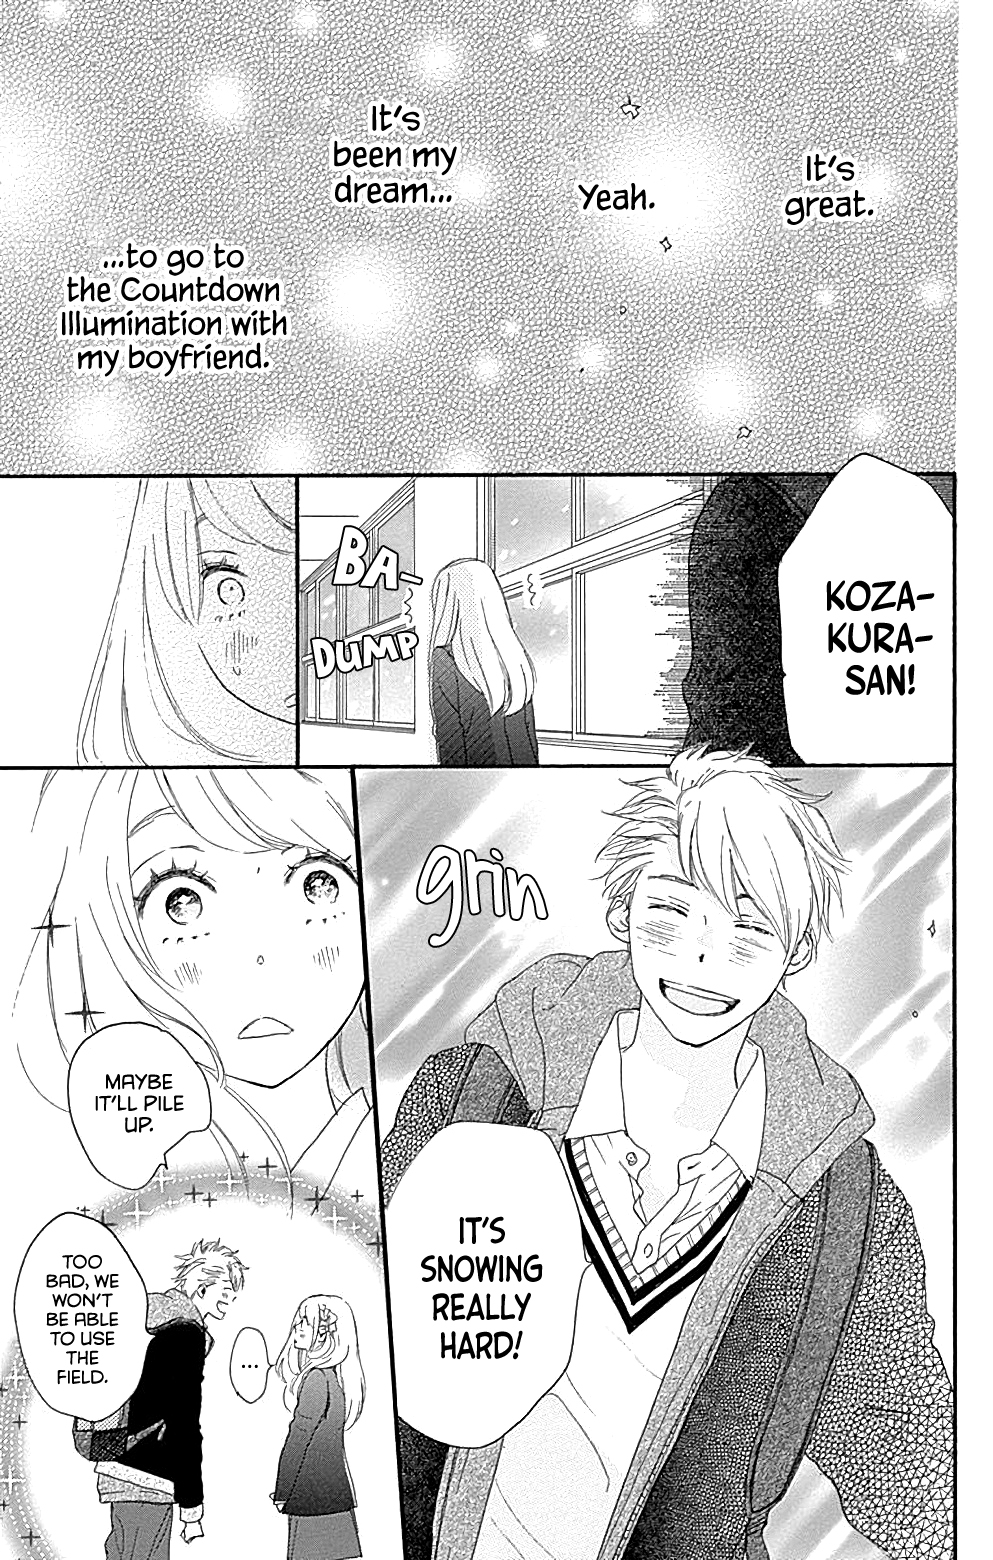 Where's My Lovely Sweetheart? Vol. 4 Ch. 13